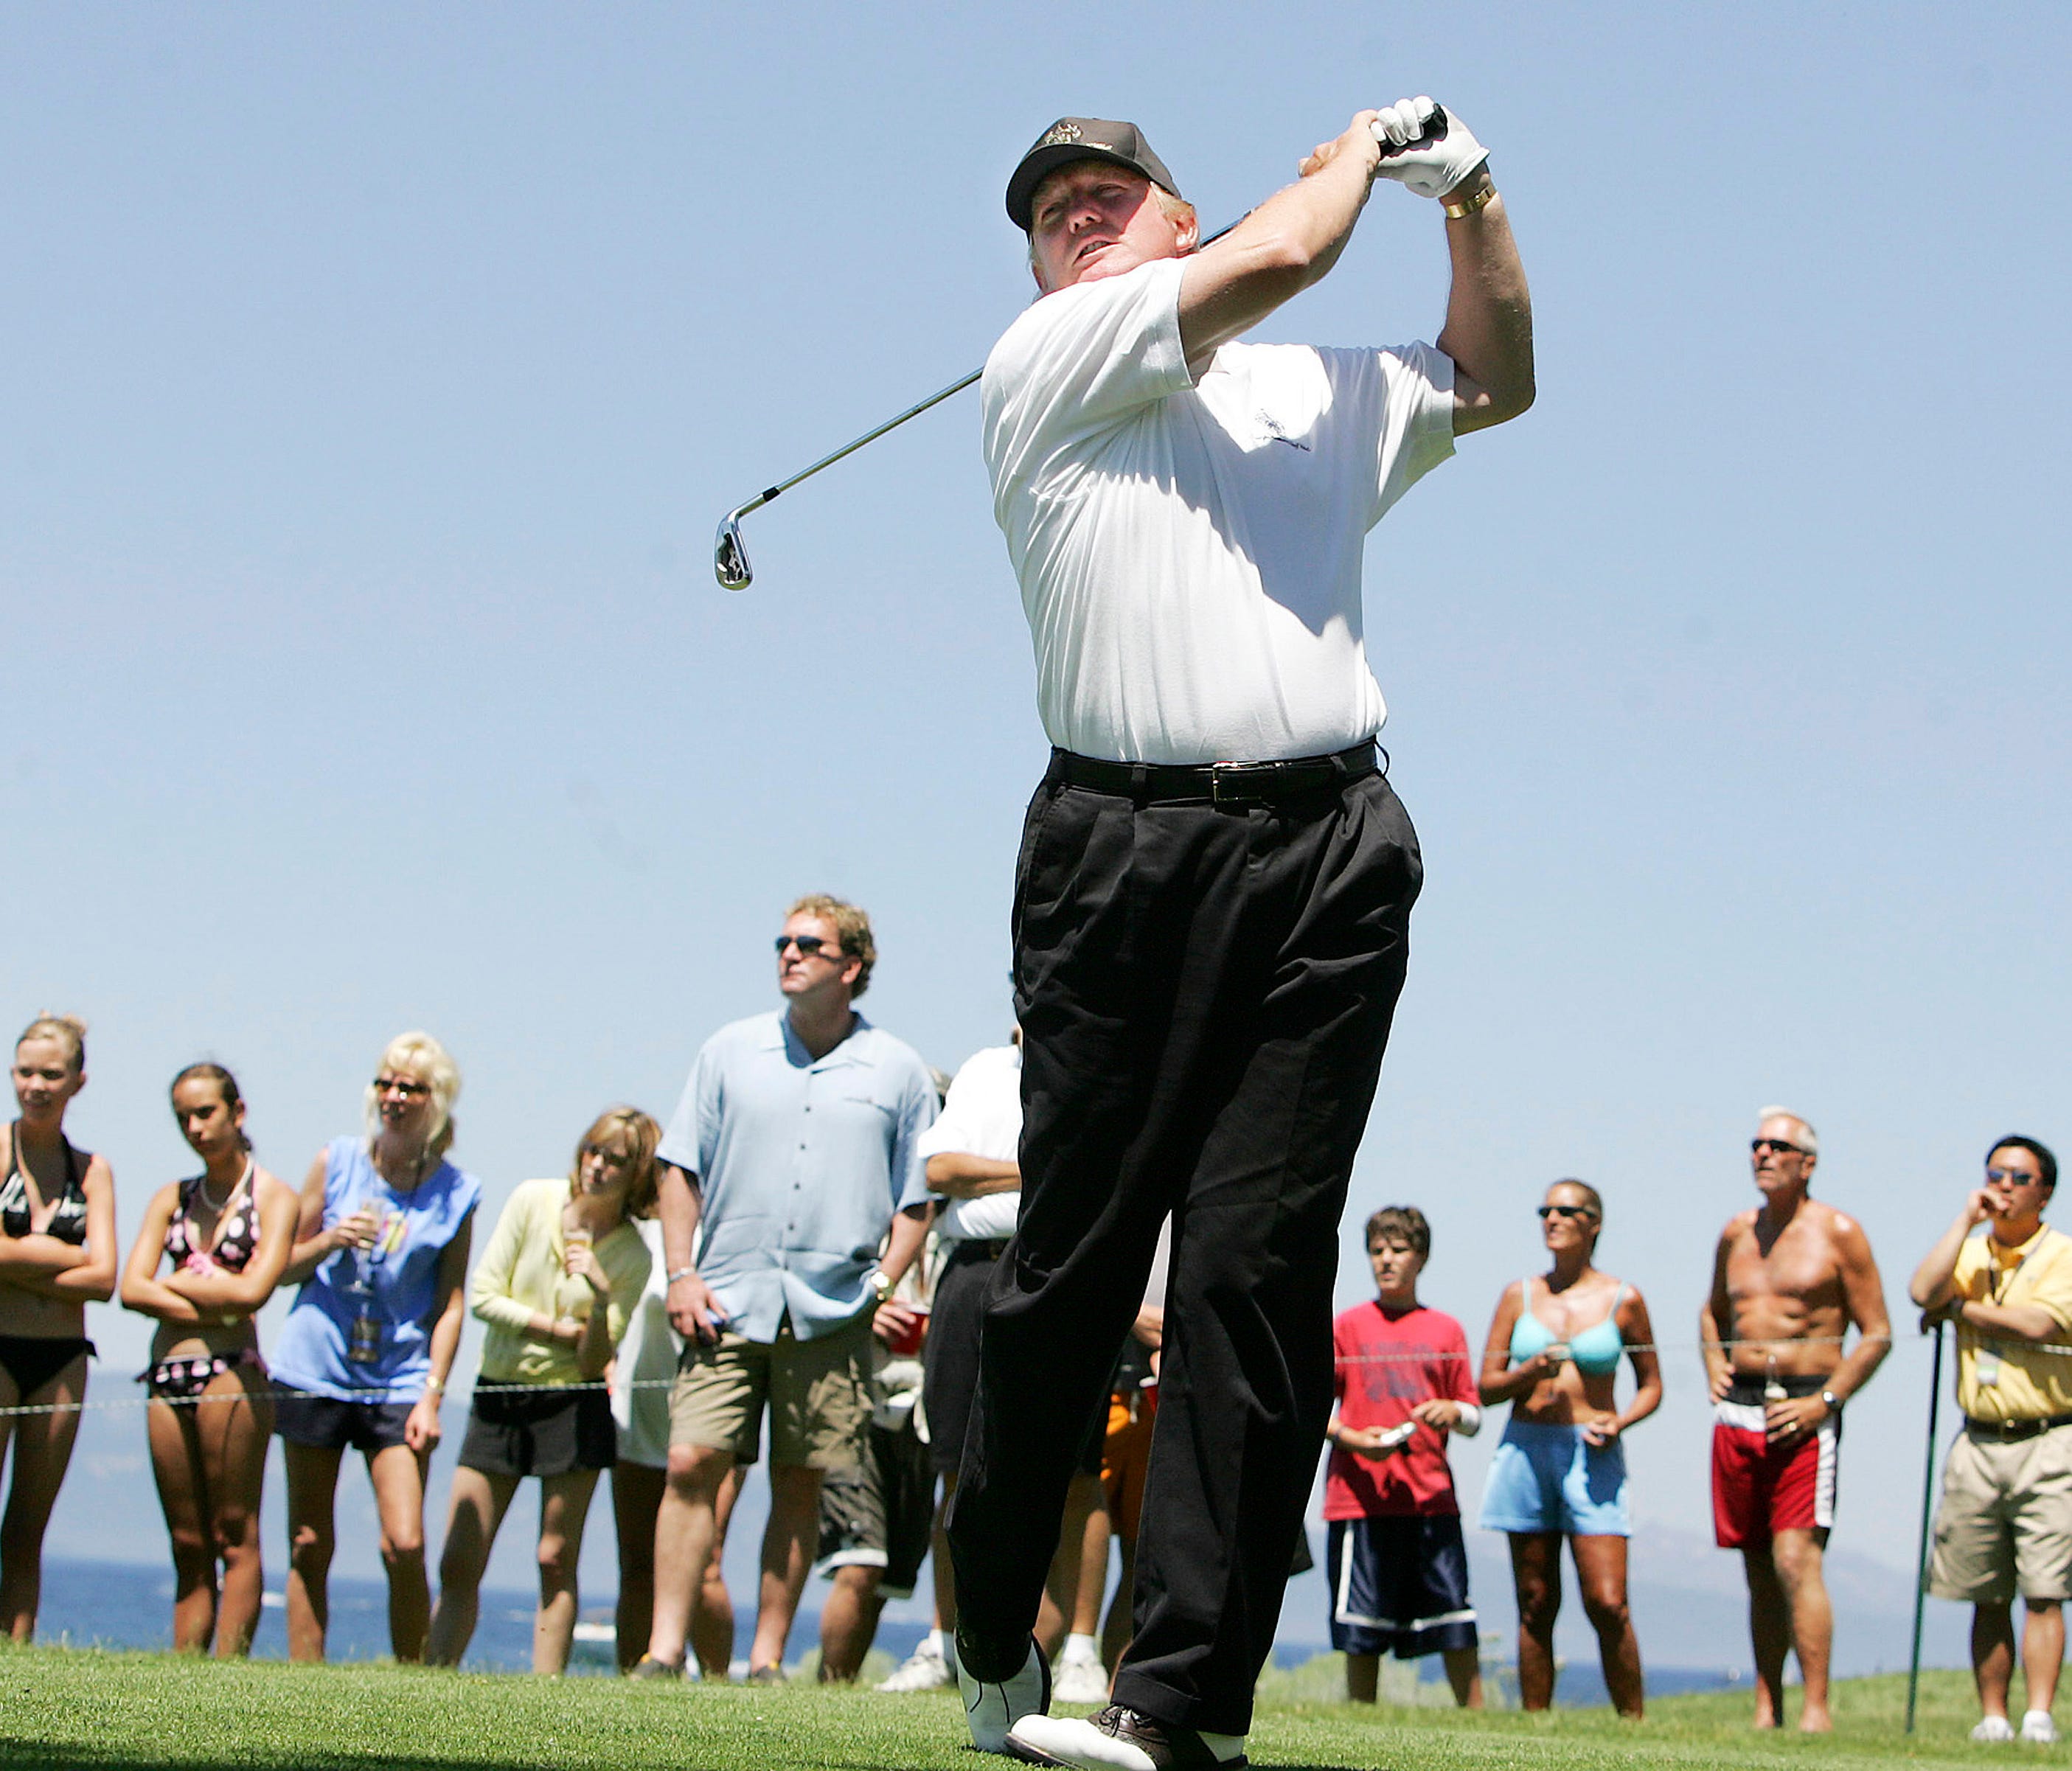 President Trump in 2005 playing golf, which is one of his main forms of exercise.